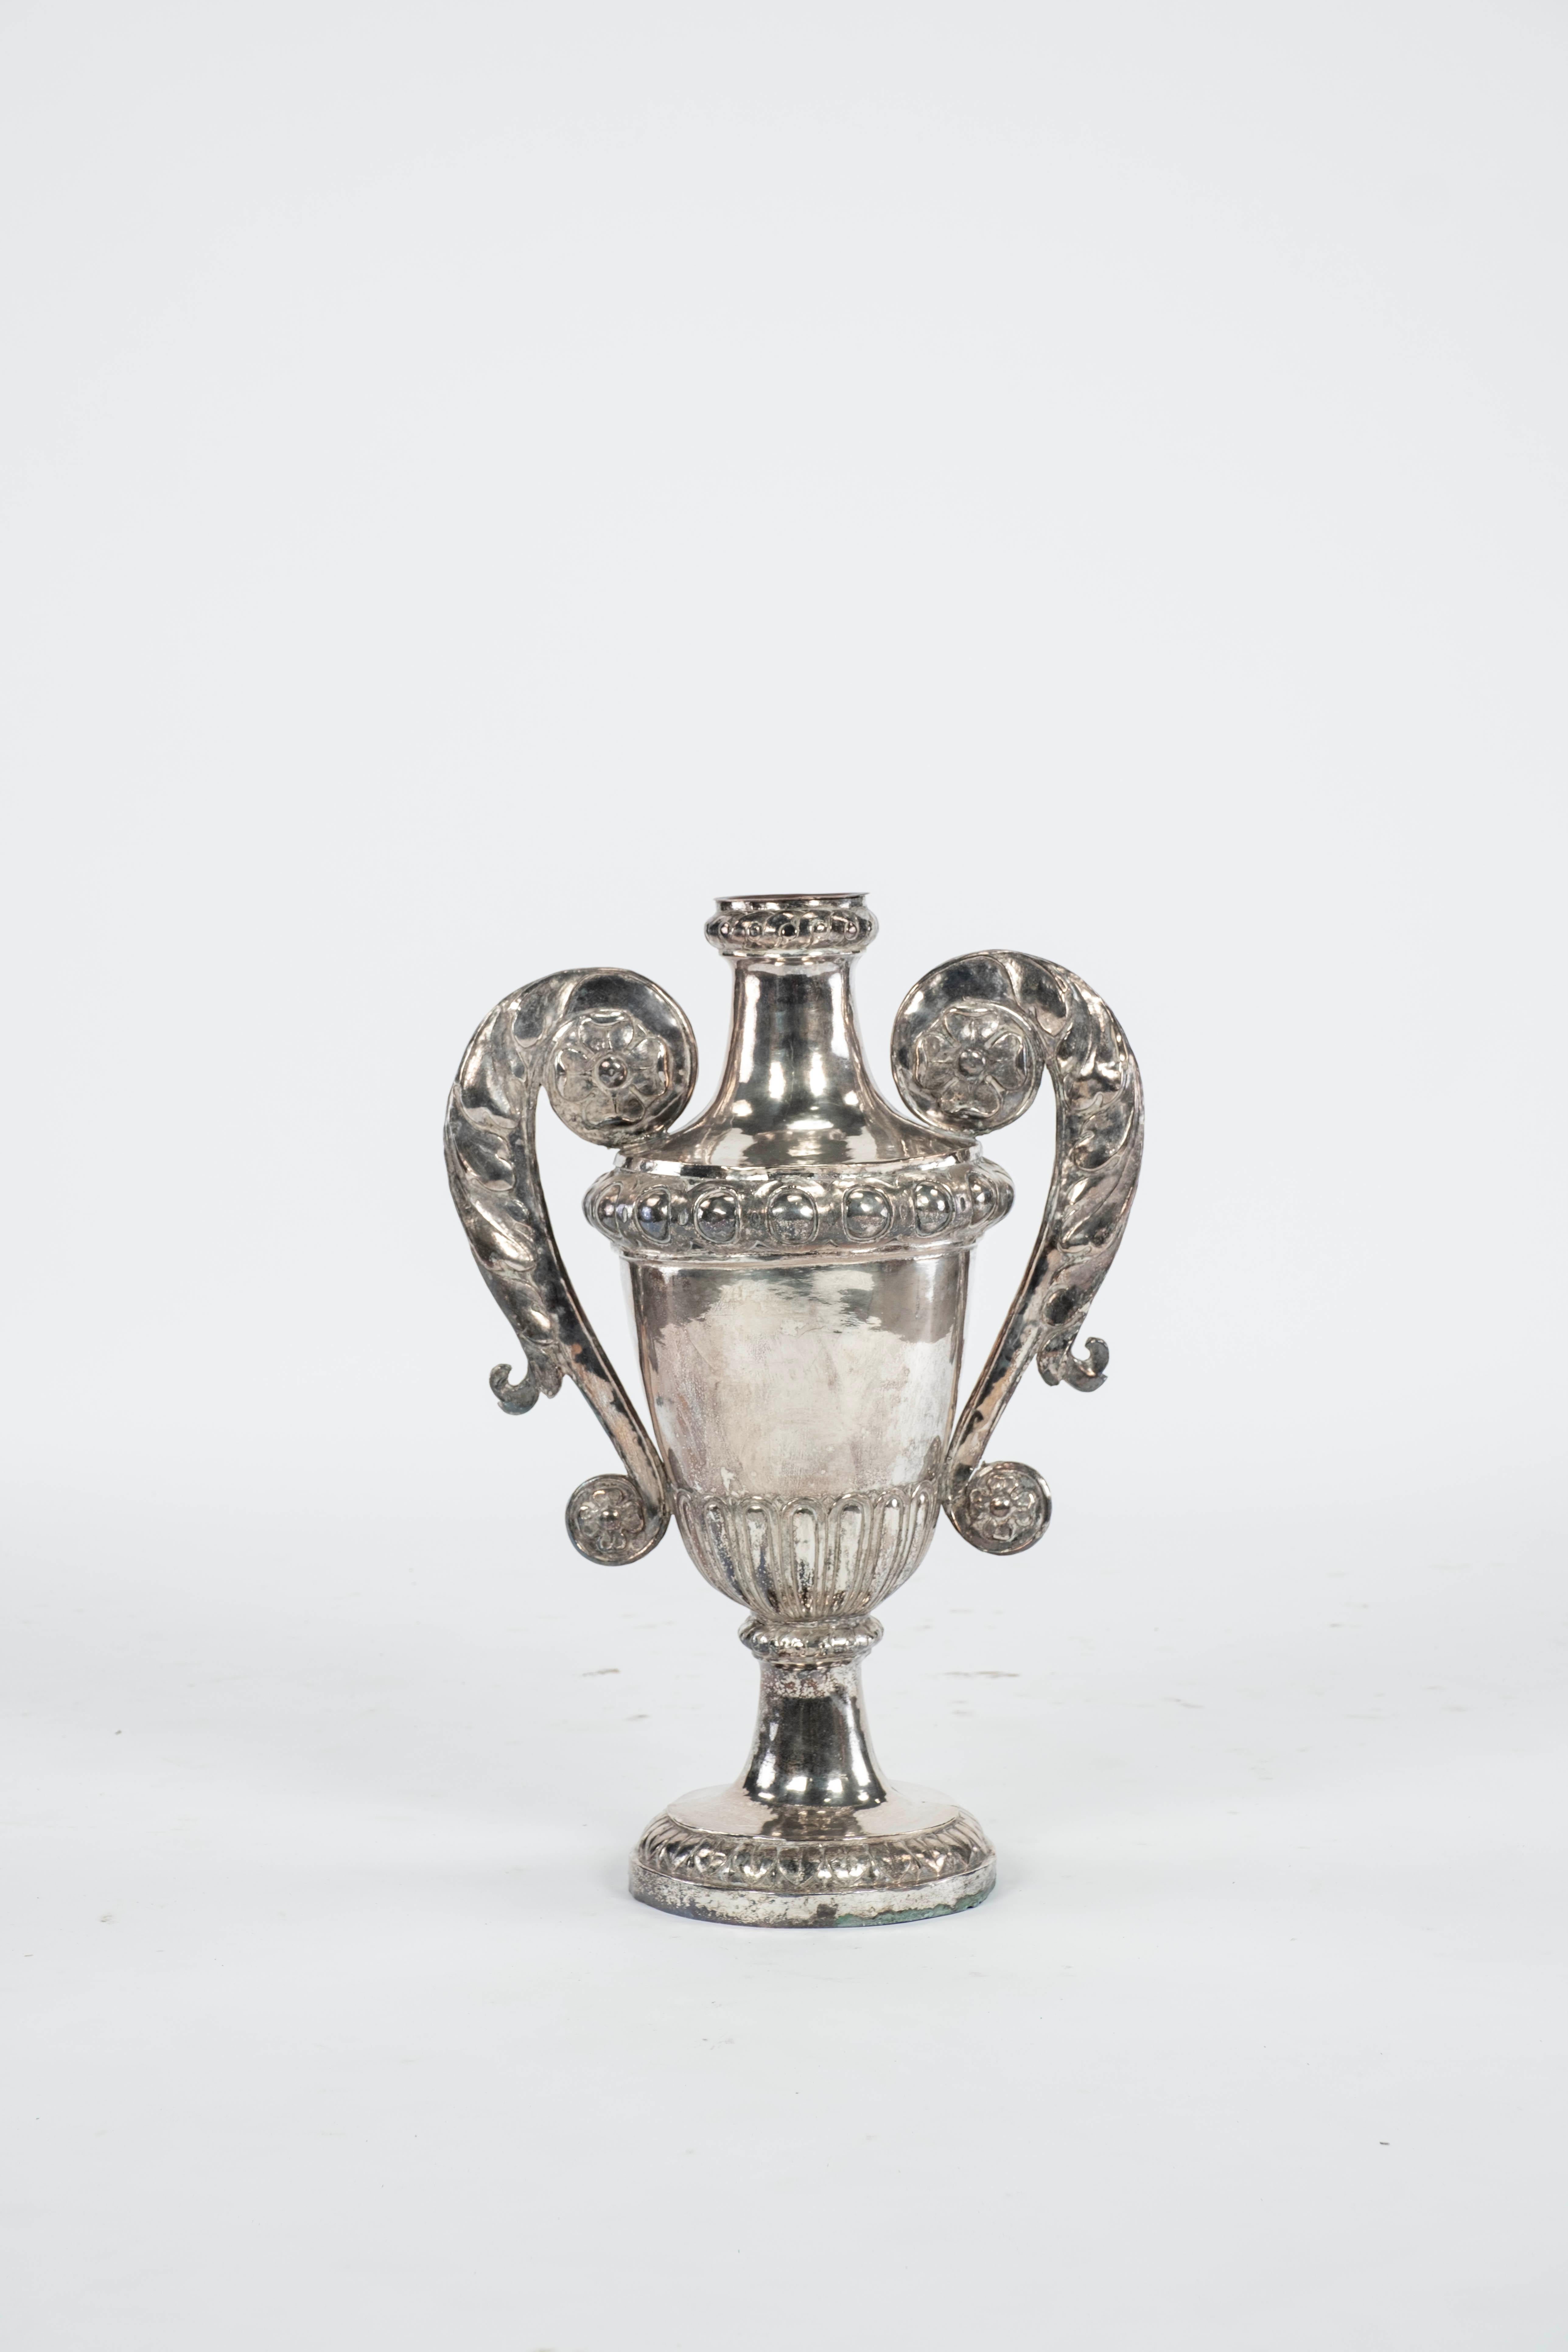 Great proportions of this hand hammered silver metal urn.  